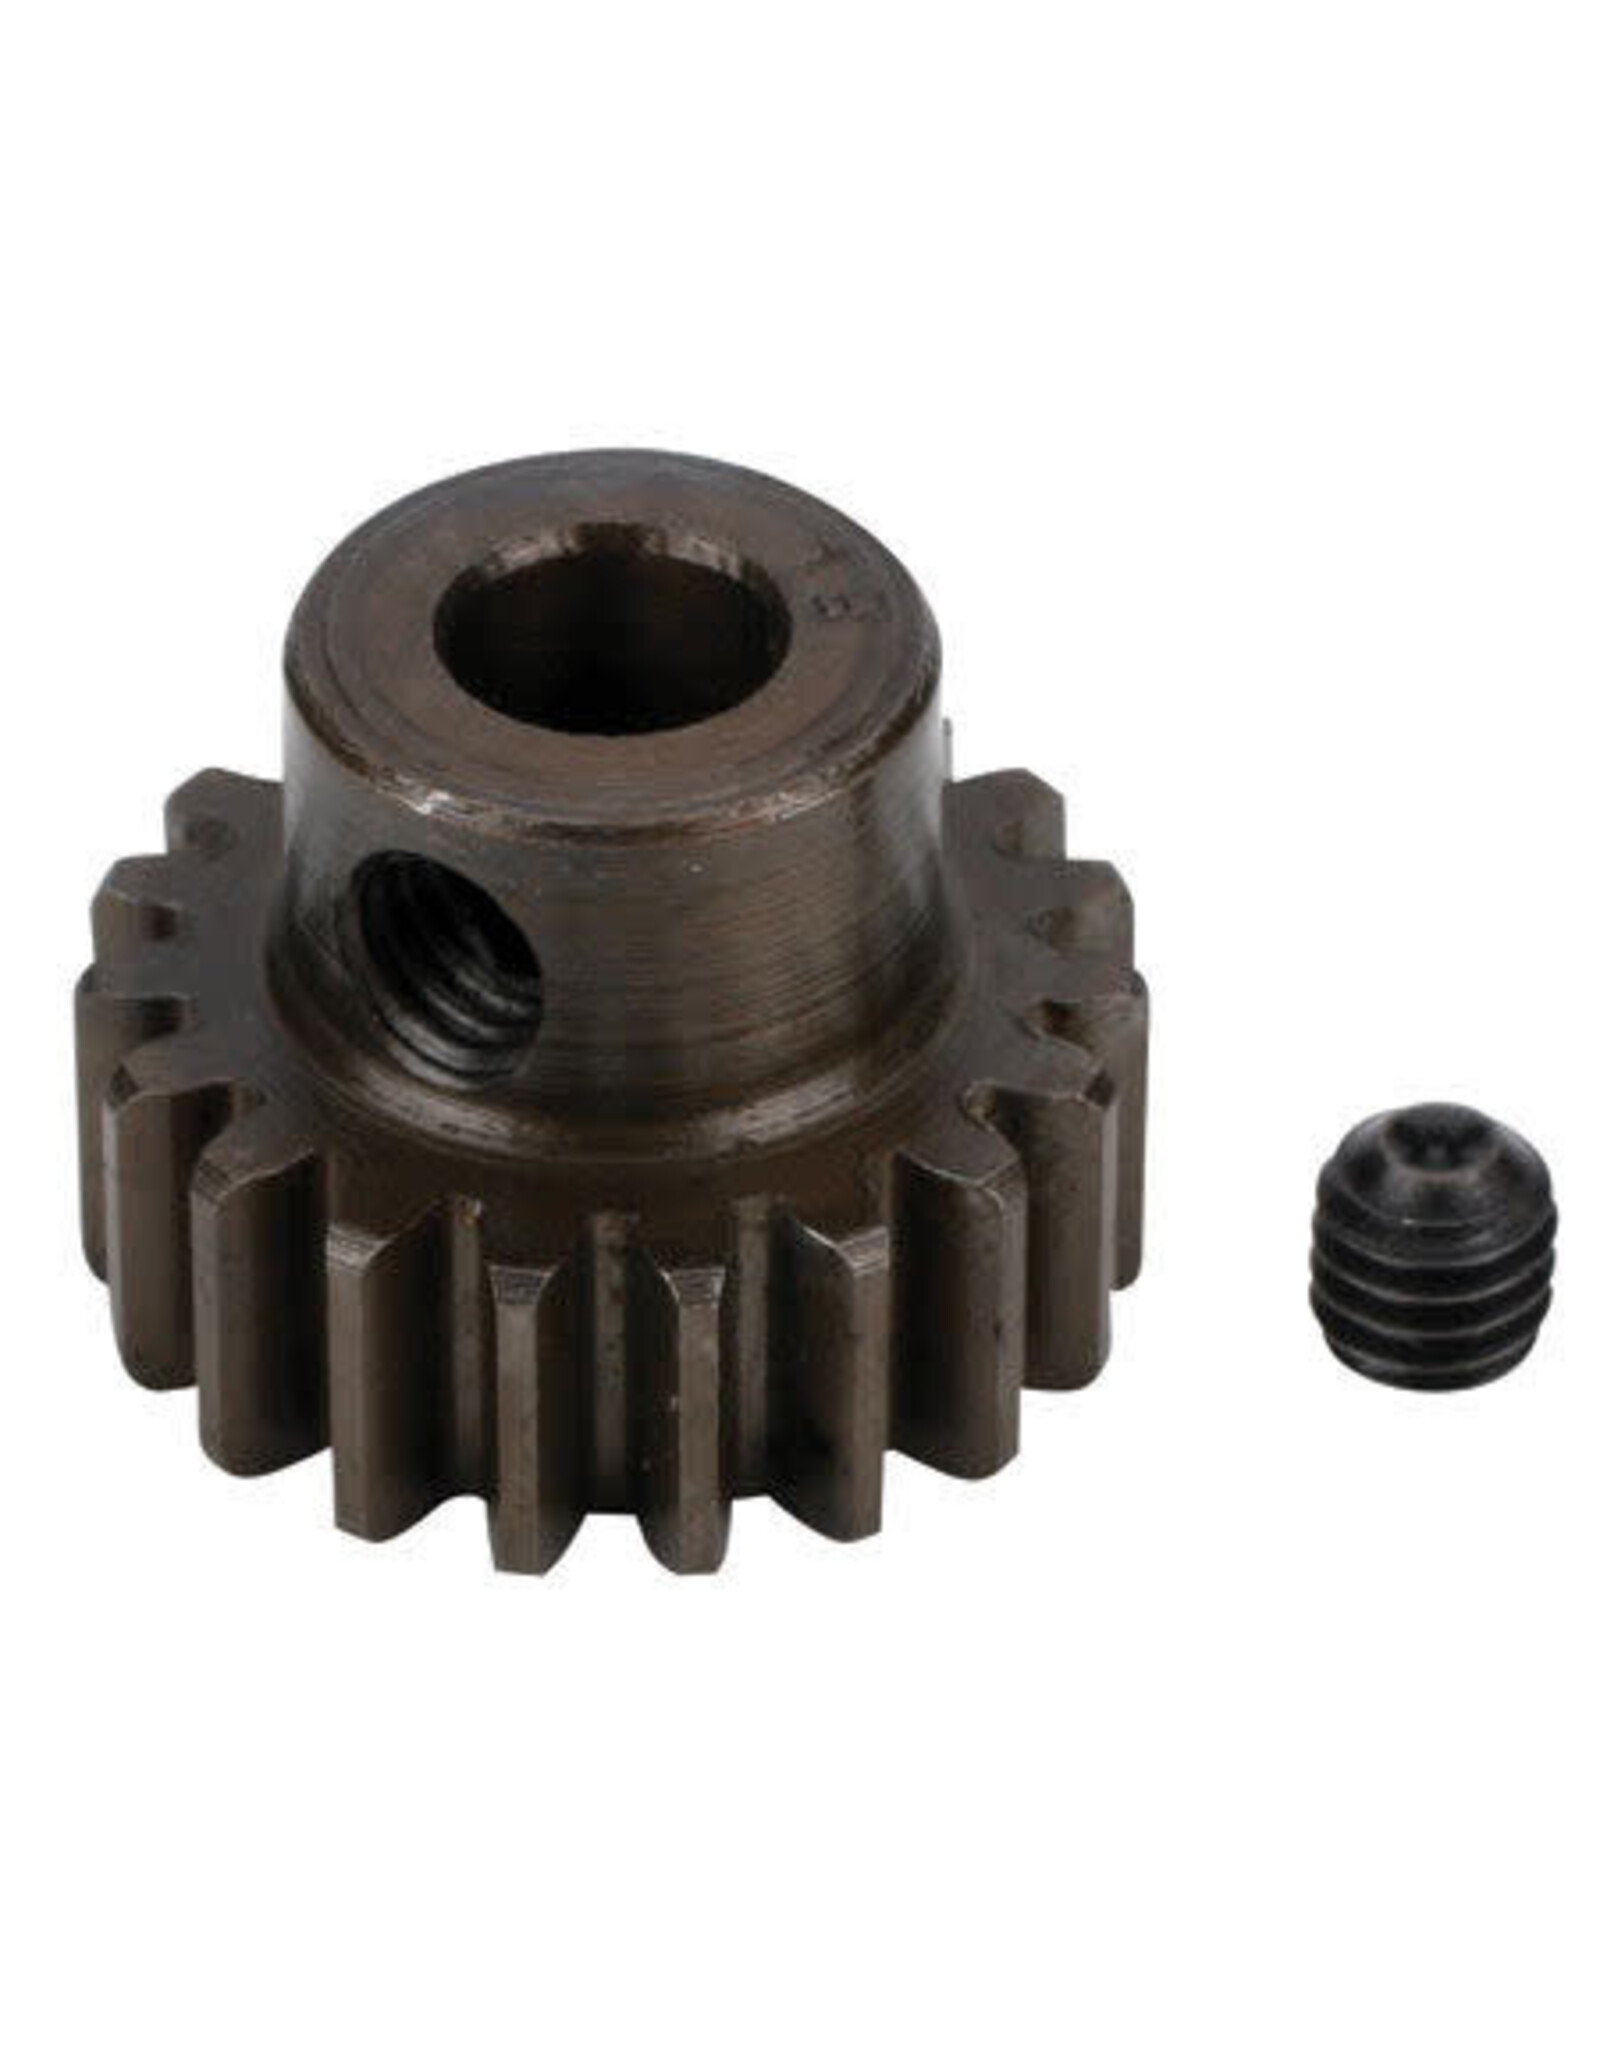 Robinson Racing Products Extra Hard 5mm Bore .8Mod Pinion 19T